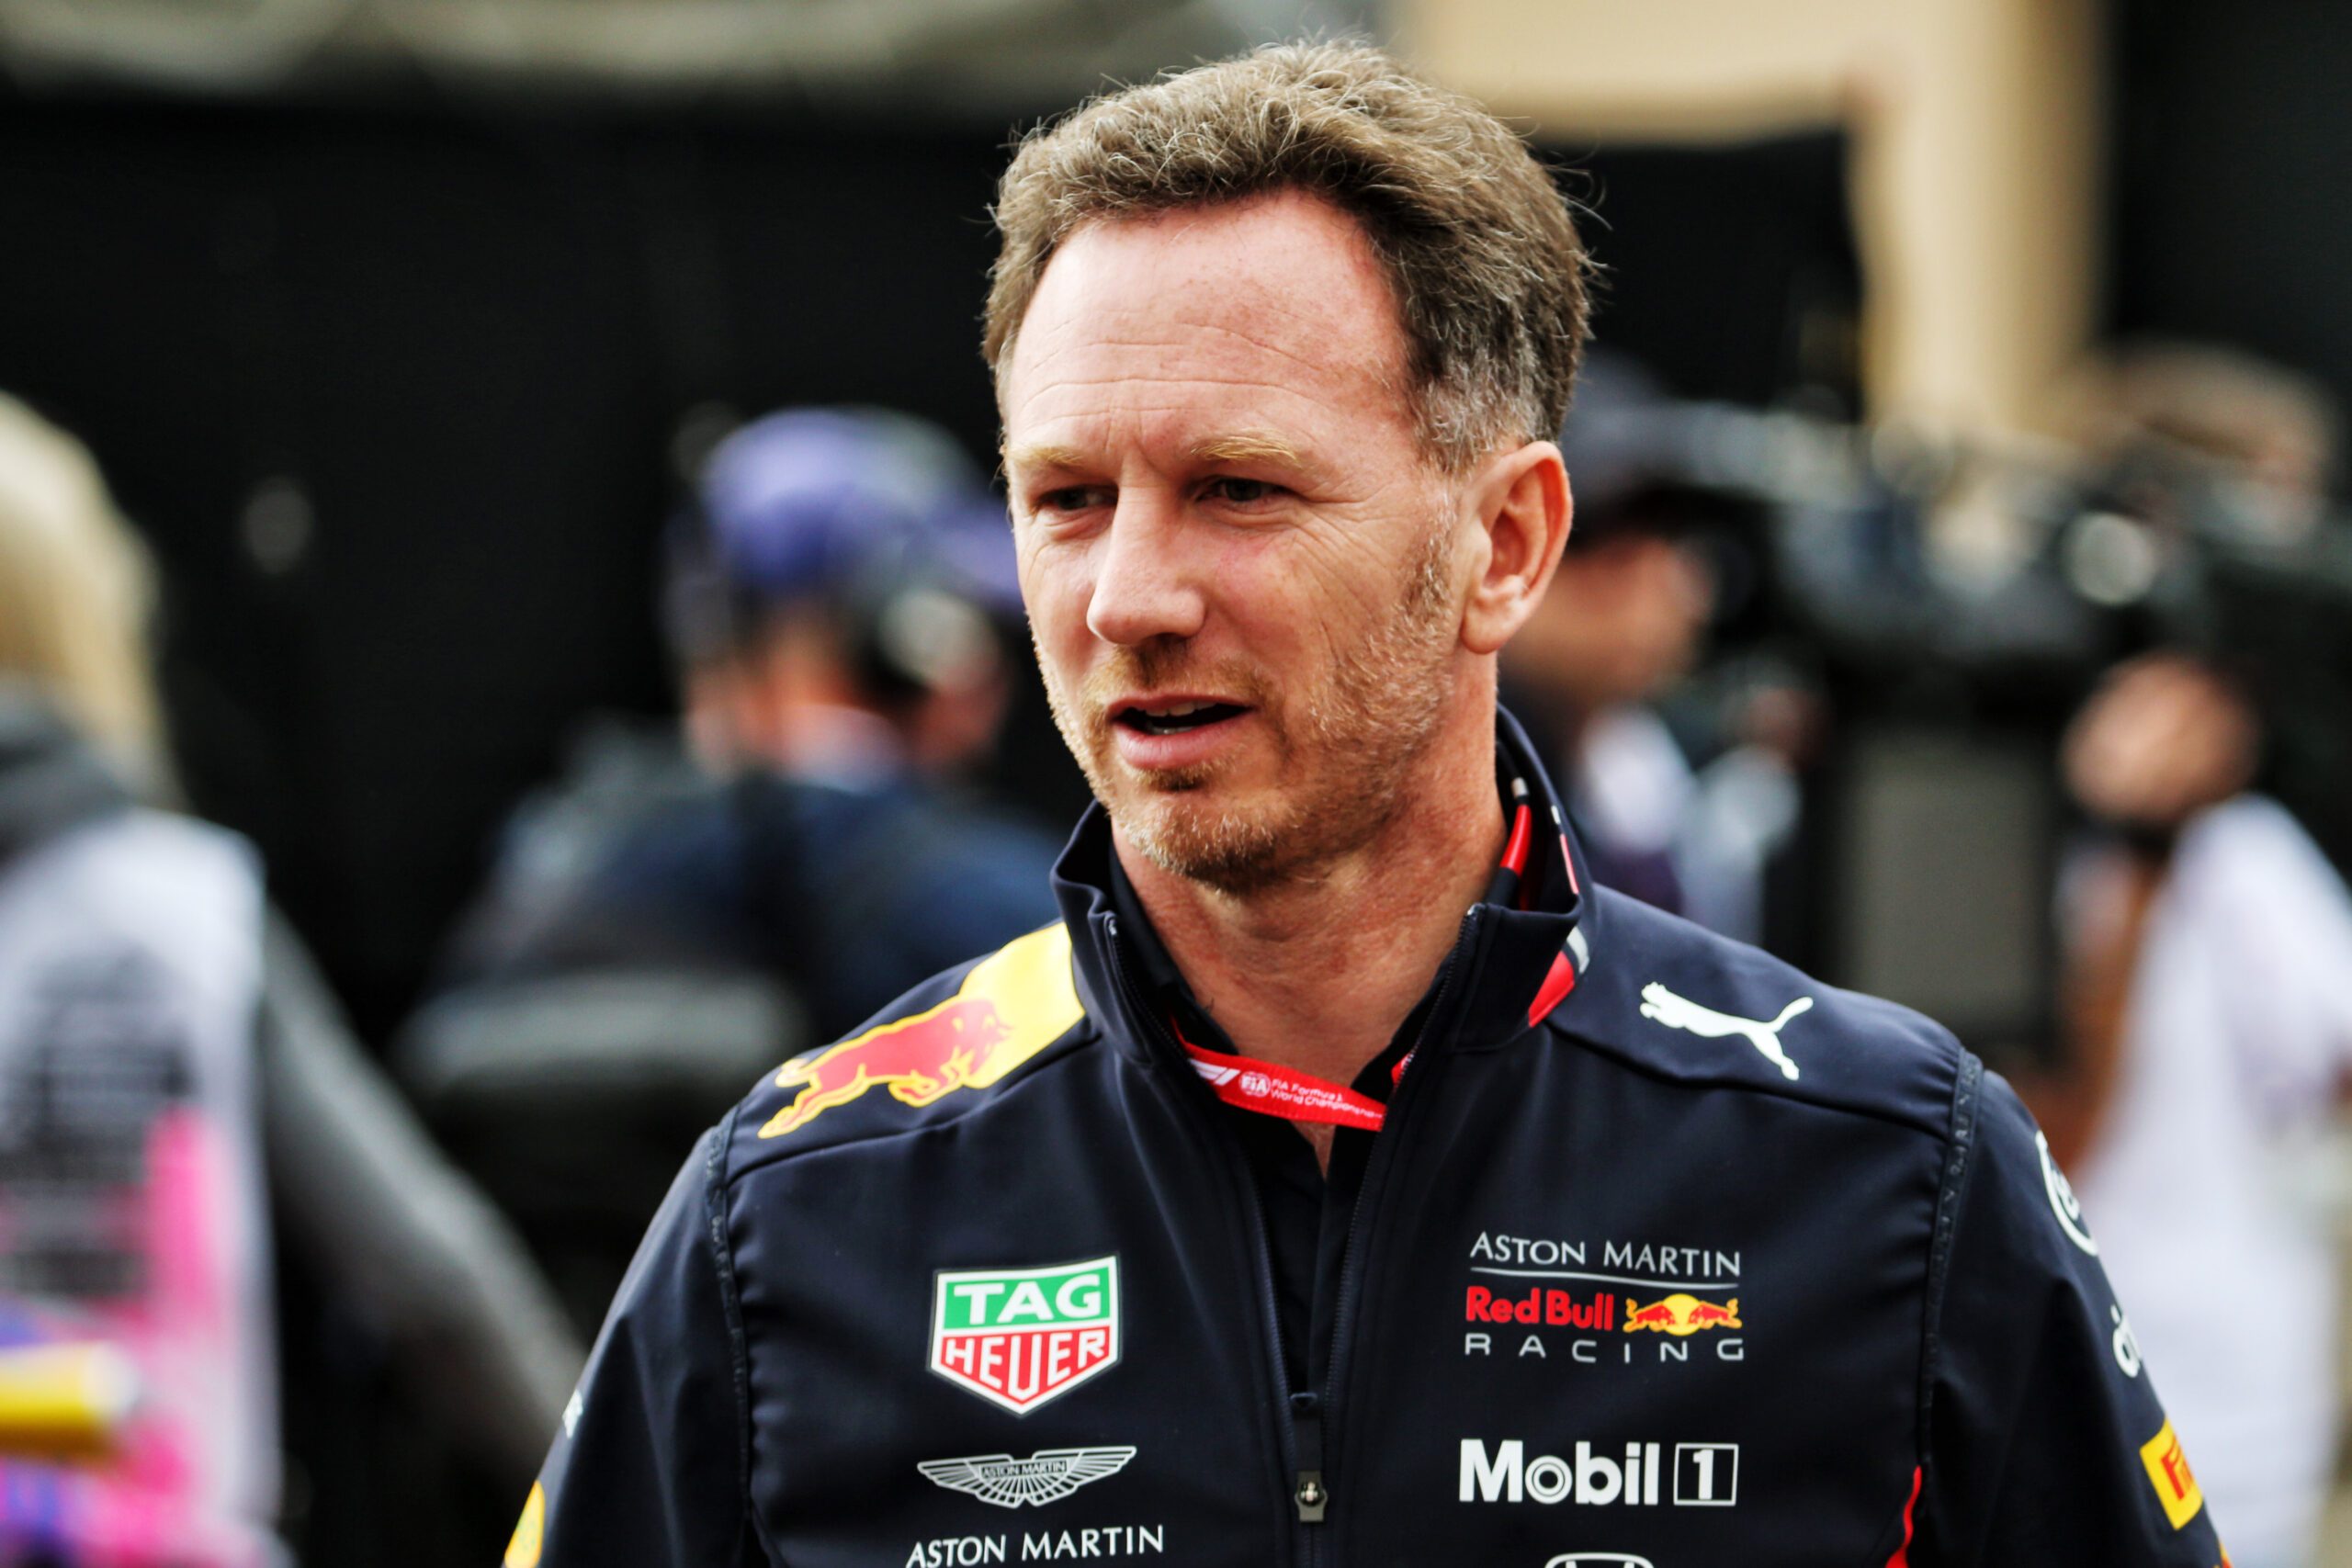 MONTE CARLO,MONACO,23.MAY.19 - MOTORSPORTS, FORMULA 1 - Grand Prix of Monaco, Circuit de Monaco, free practice. Image shows Christian Horner (Red Bull Racing Team Principal). Photo: GEPA pictures/ XPB Images/ Batchelor - ATTENTION - COPYRIGHT FOR AUSTRIAN CLIENTS ONLY